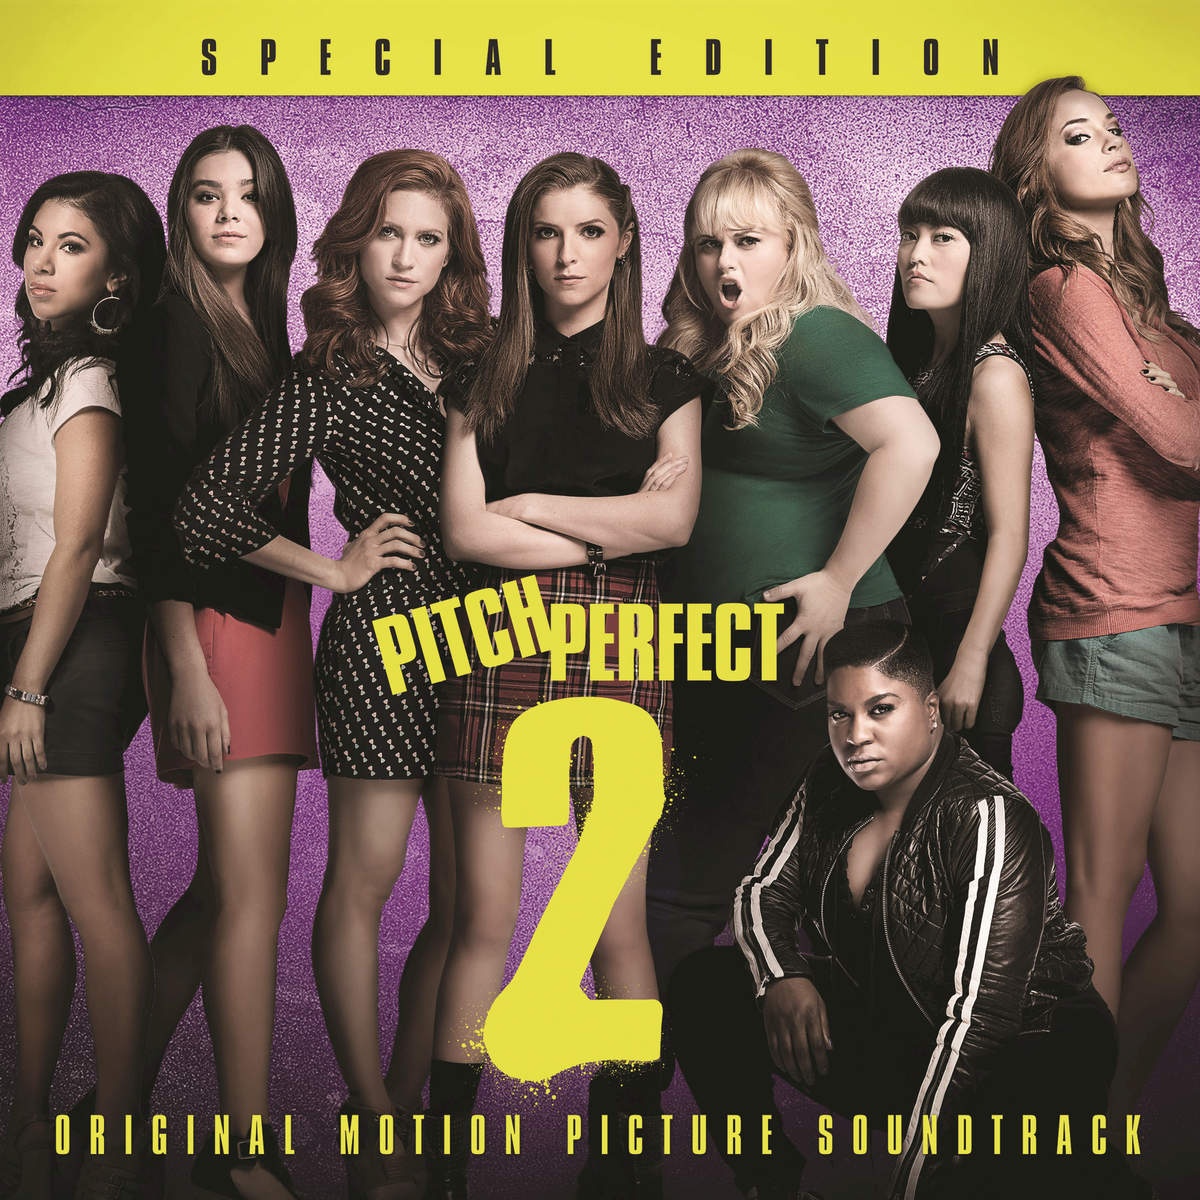 World Championship Finale 2 (From "Pitch Perfect 2" Soundtrack)